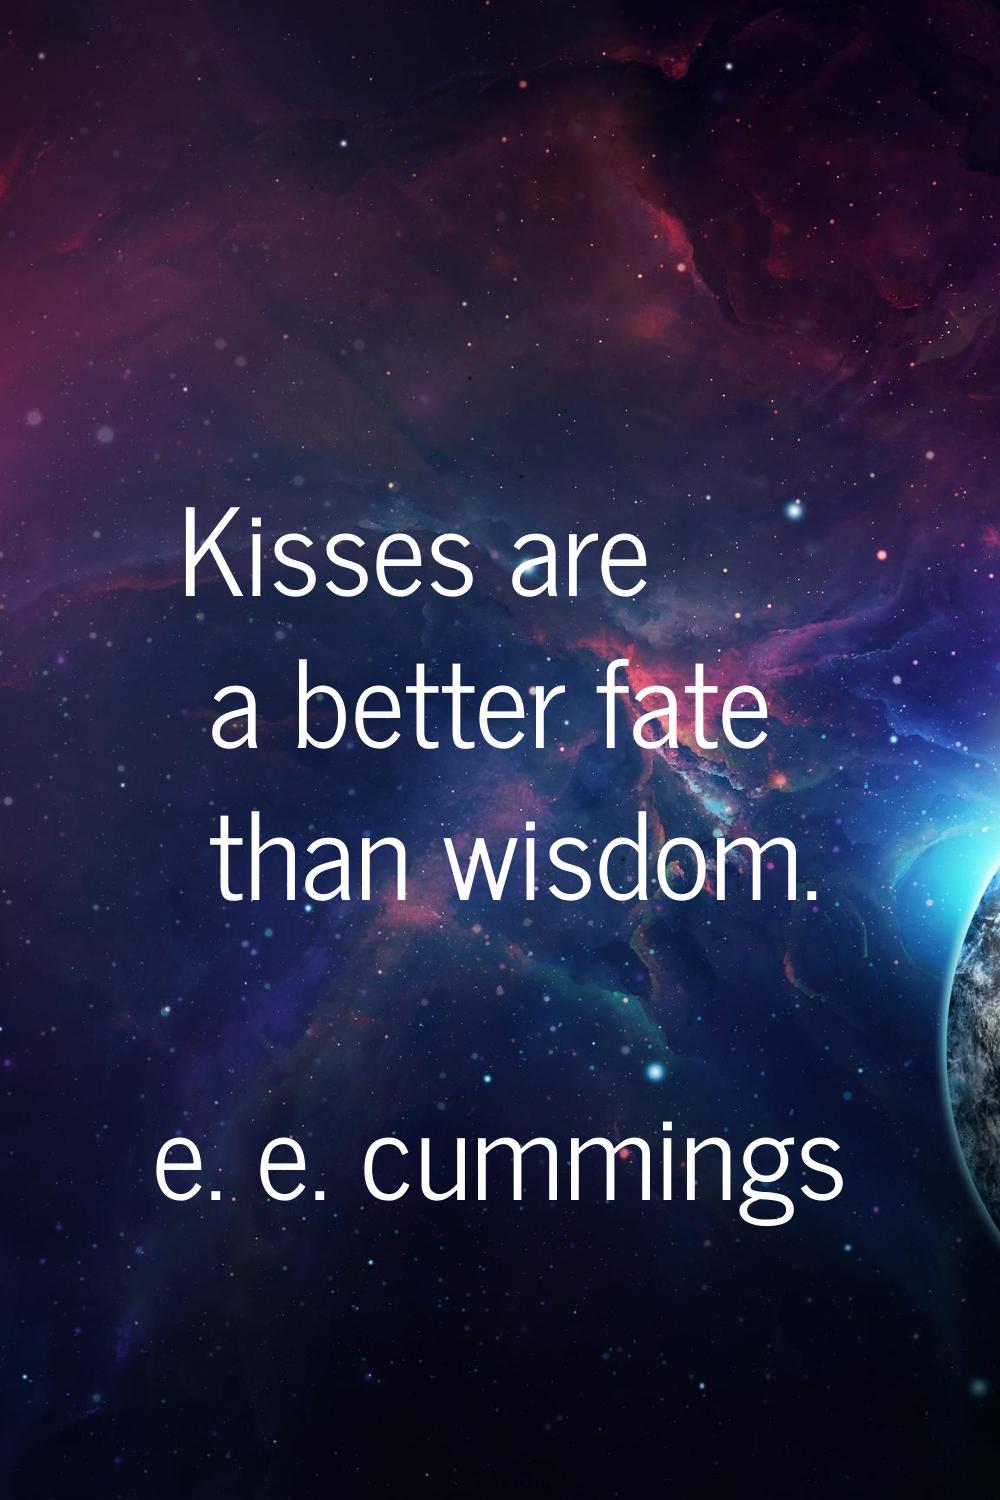 Kisses are a better fate than wisdom.